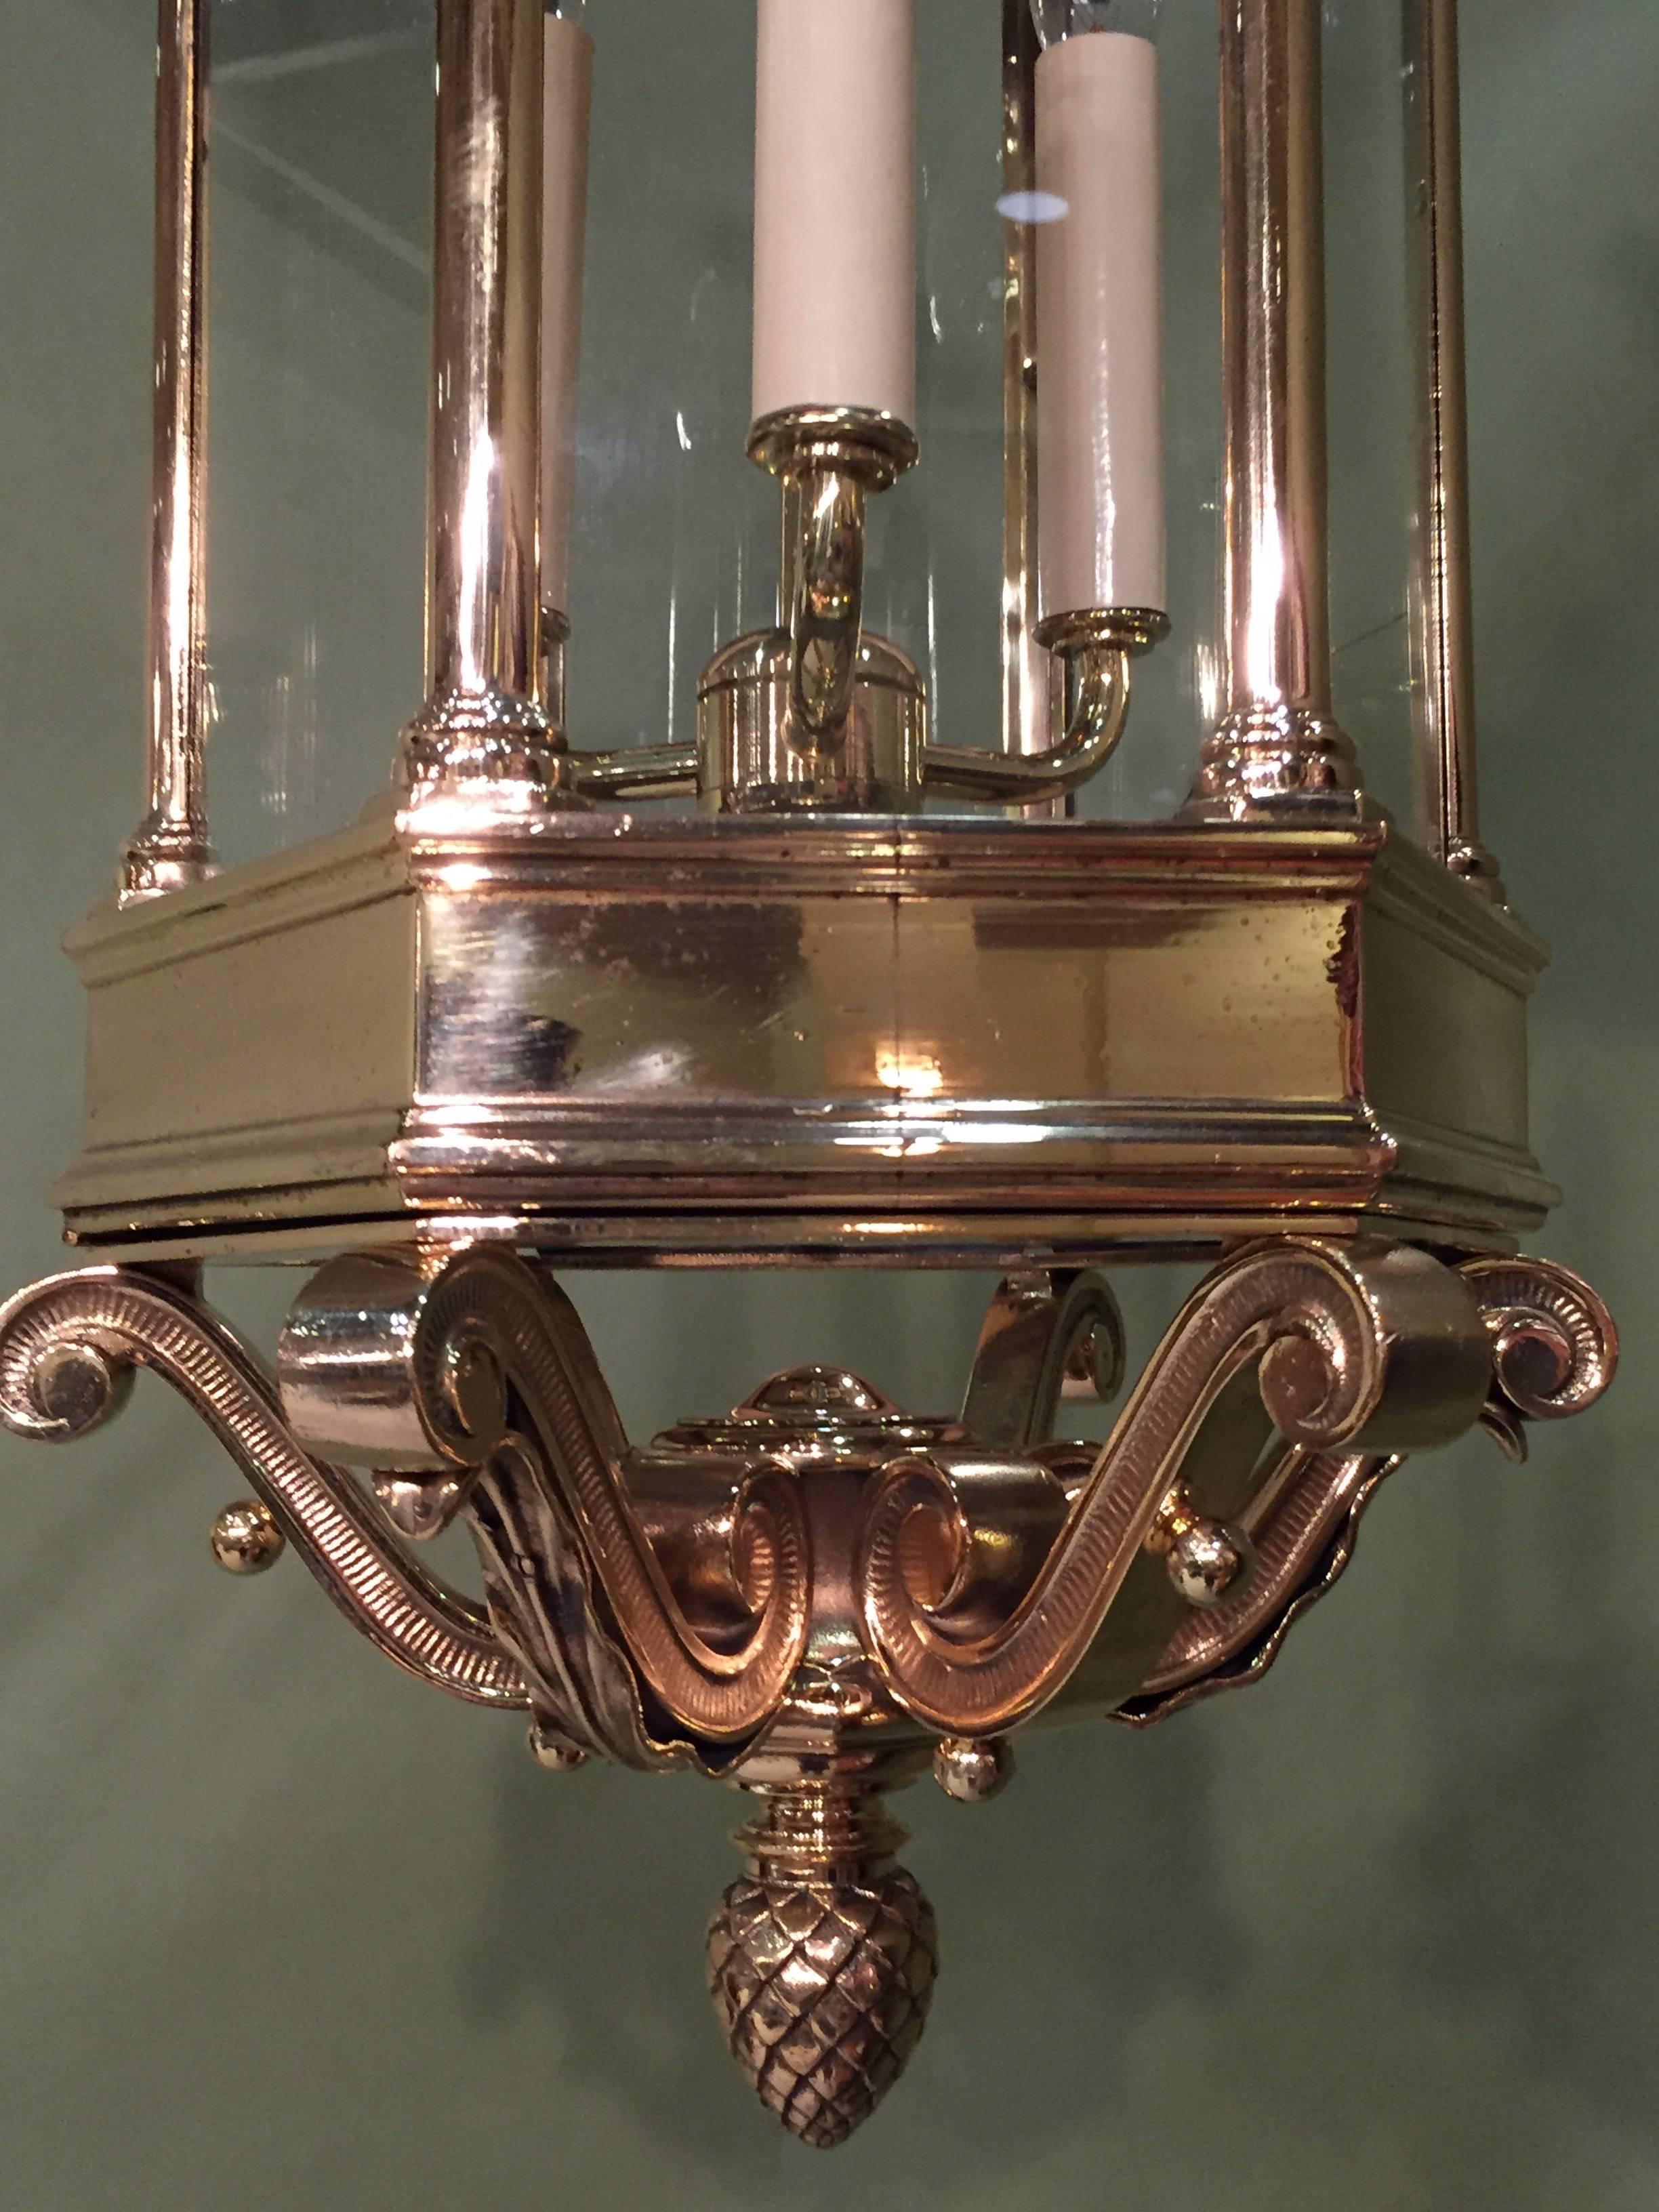 19th Century English Brass Hanging Hall Light with Nicely Formed Brass Work on Base